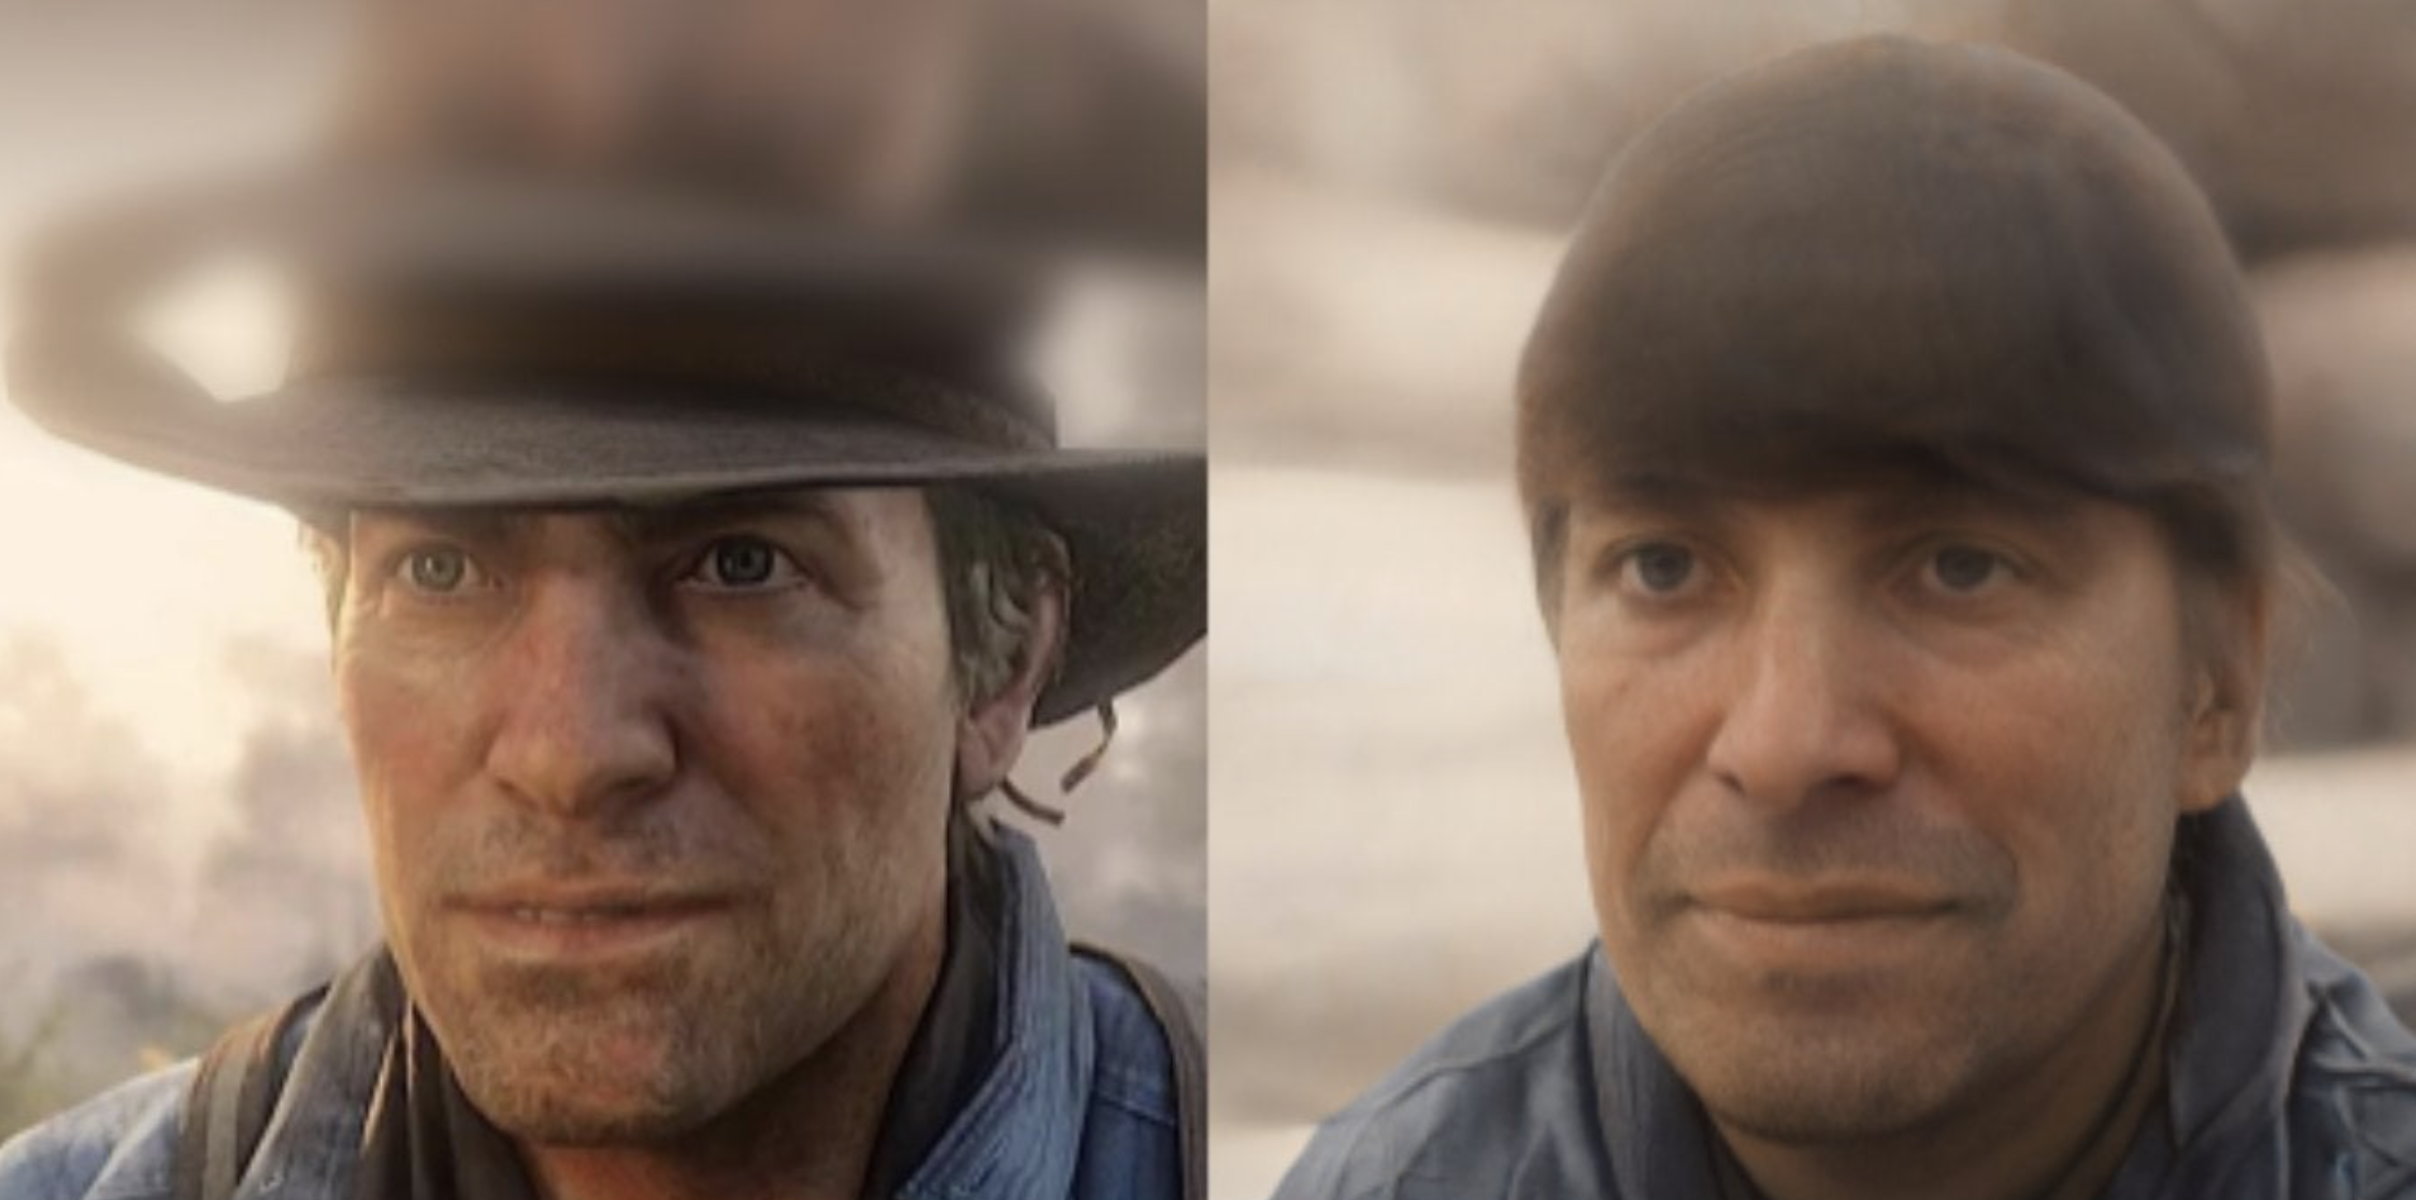 realistic video game characters - Arthur Morgan (Red Dead Redemption 2)